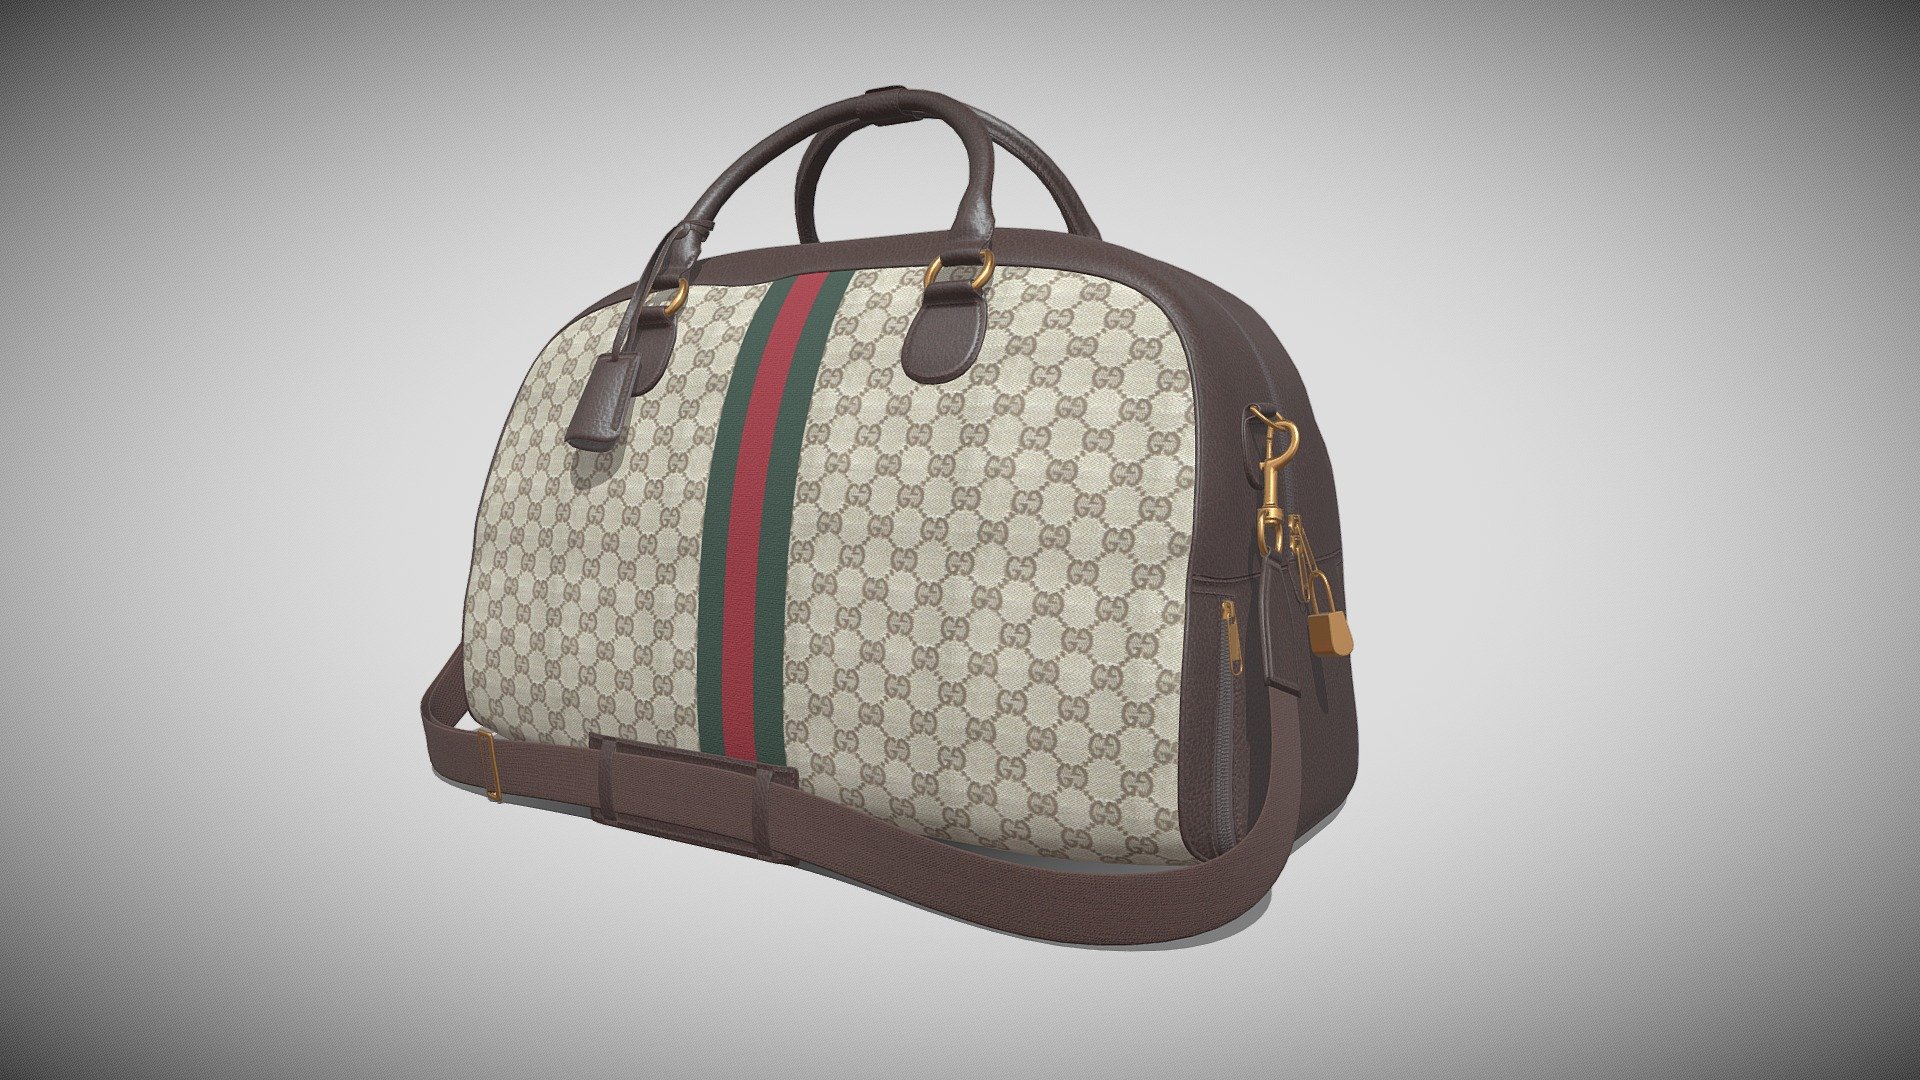 LEATHER GUCCI TRAVEL BAG 

https://www.artstation.com/a/30142364

To increase the speed of each artist in all tasks, we need a library of suitable models for various purposes. In this package, we prepared high-quality low-poly asset including Bag, PBR textures 
The model has a standard quad topology that makes it easily editable if needed. The model has proper UVs ready for the baking process. Models can be used in all 3D software and render engines. Avatar: 

Available formats: Fbx Obj

After purchasing this product you will get the following:

Low poly 3d model including Shoes PBR Texture 4096*4096 - LEATHER GUCCI TRAVEL BAG - 3D model by s.javadhashemi 3d model